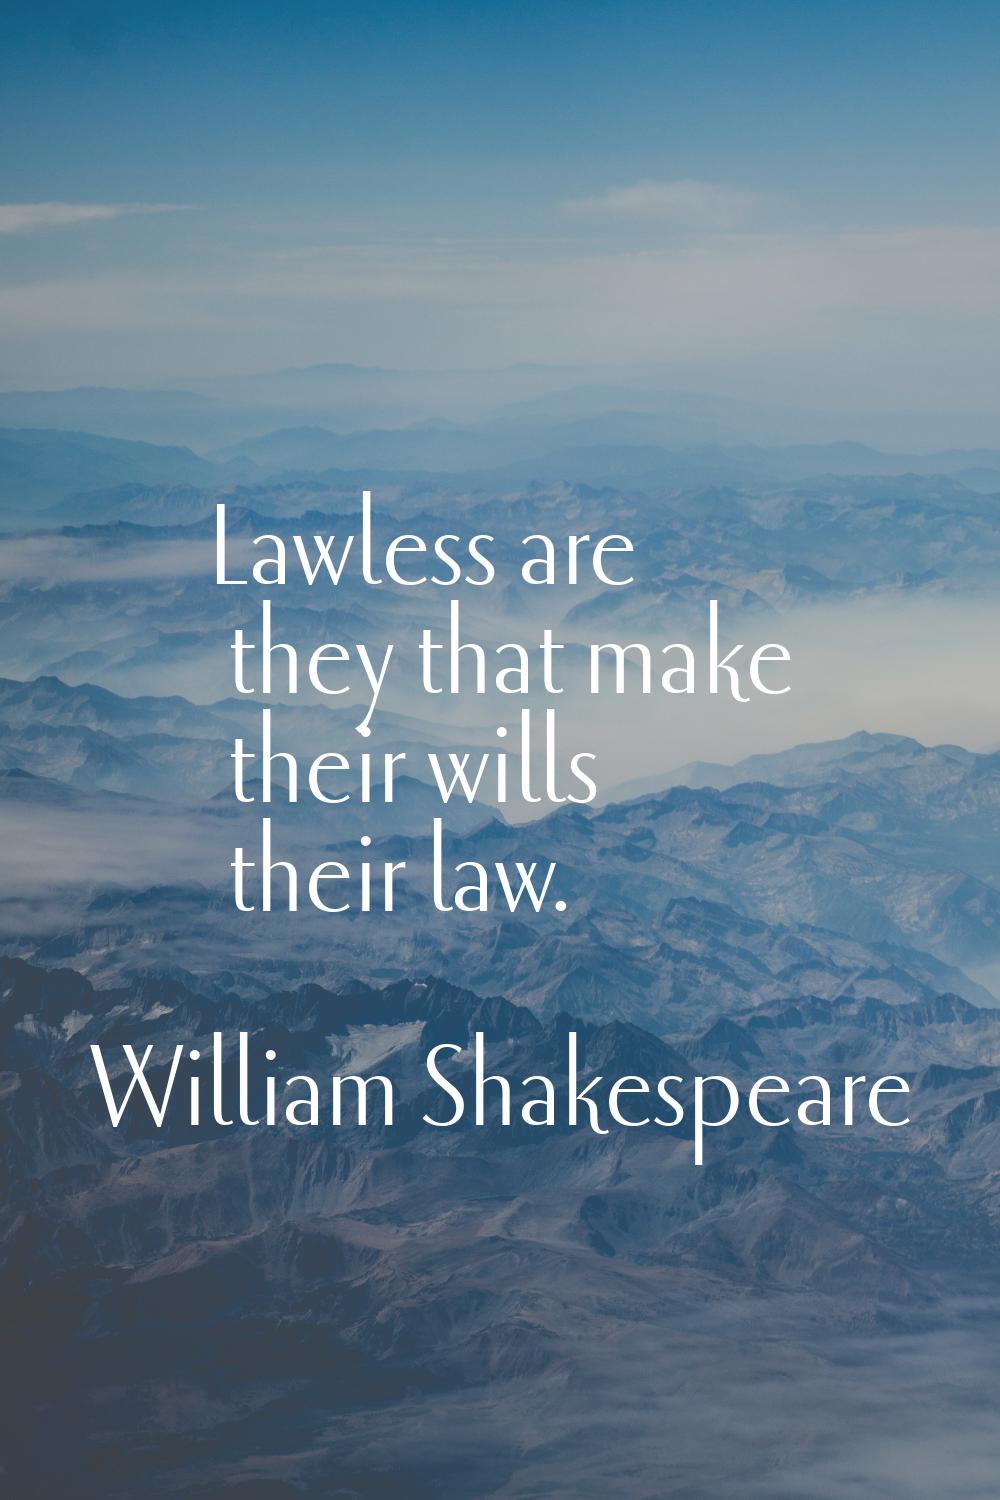 Lawless are they that make their wills their law.